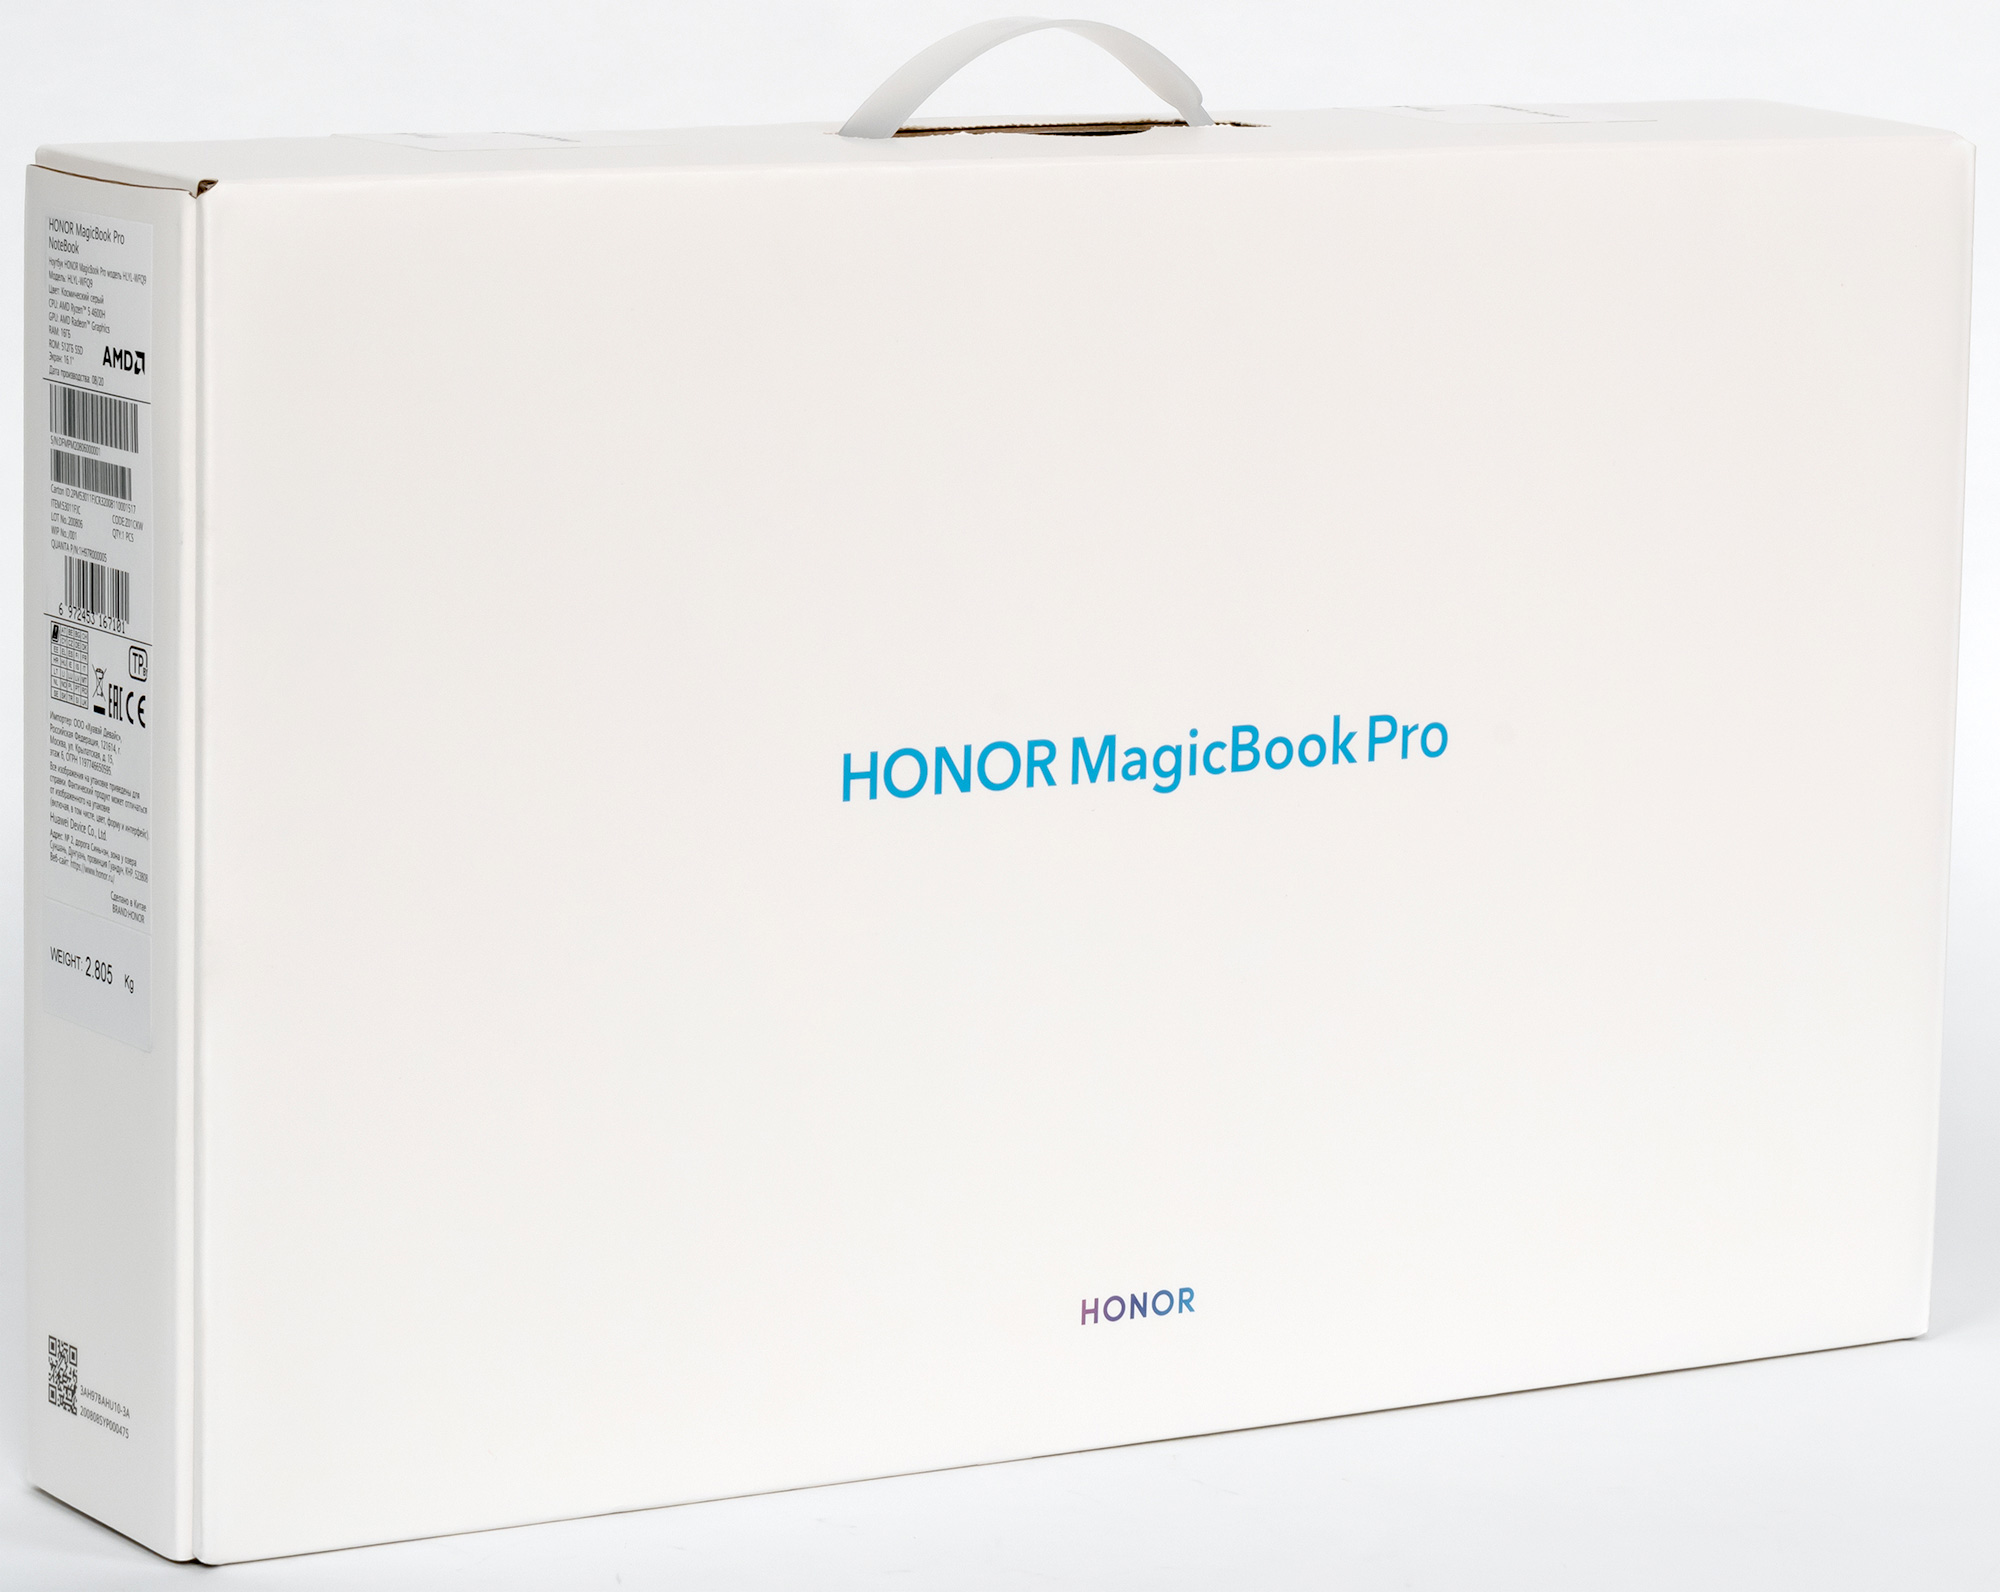 Honor magicbook pro обзоры. Honor MAGICBOOK Pro 16.1. Ноутбук Honor MAGICBOOK Pro 16. 16.1" Ноутбук Honor MAGICBOOK Pro. Honor MAGICBOOK 16 Pro 4600h.